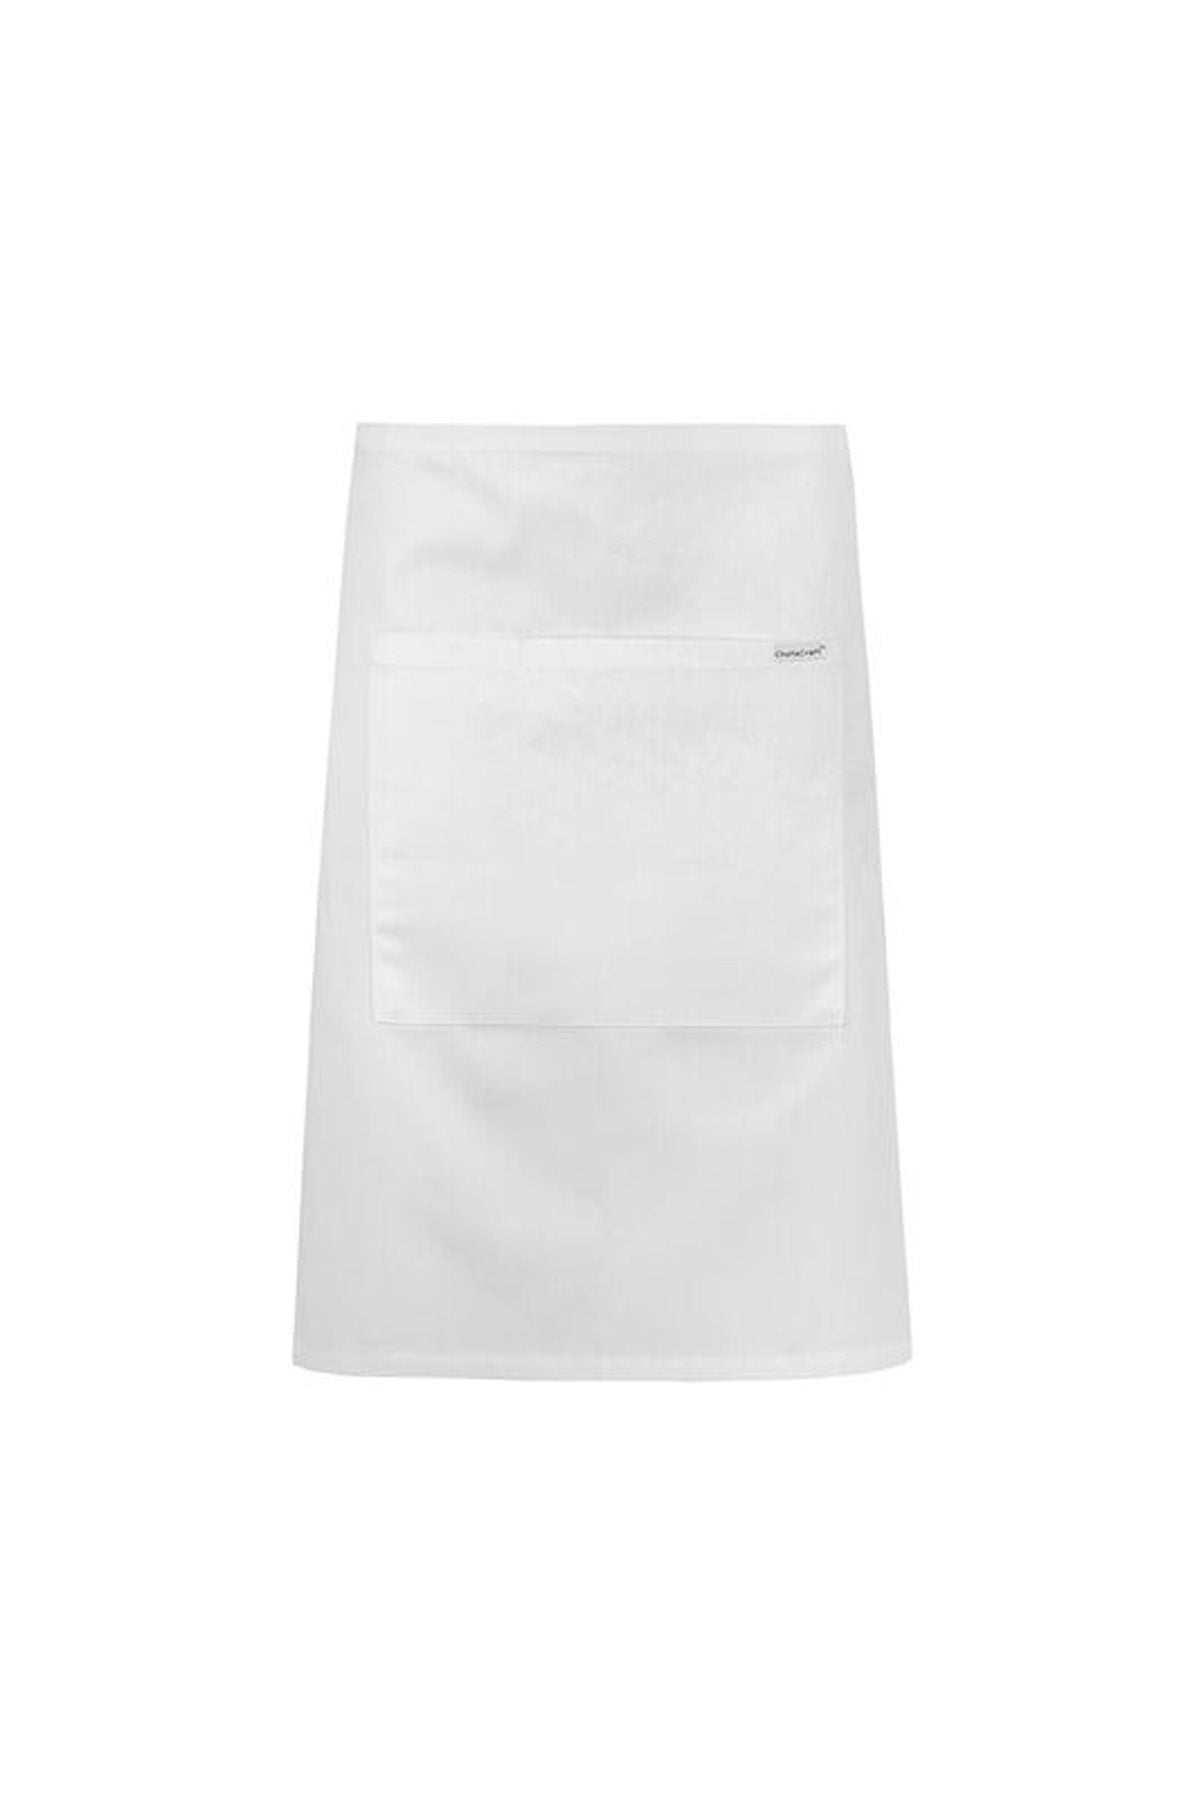 Half Apron With Pocket - made by ChefsCraft